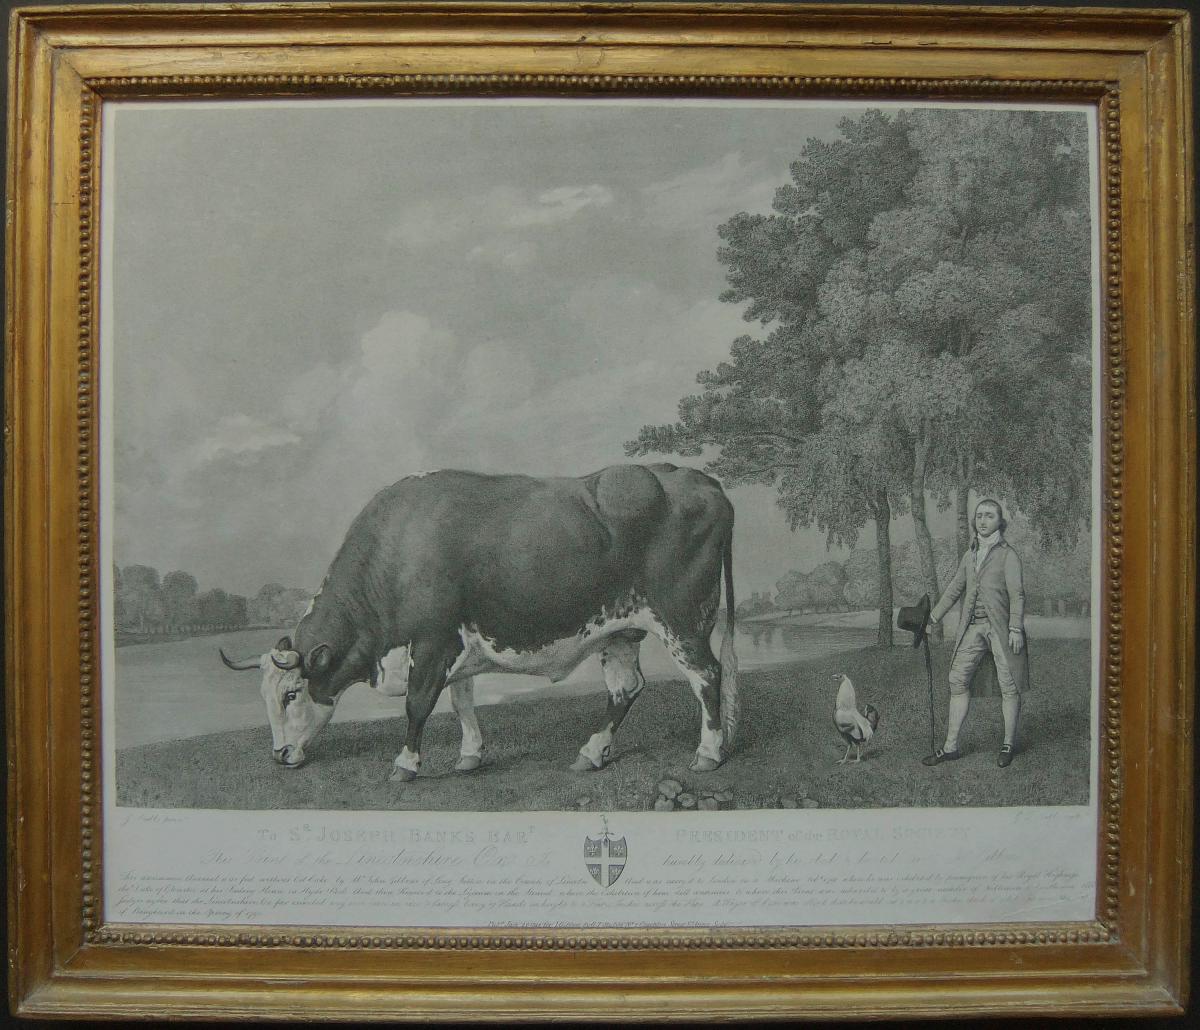 George Stubbs "The Lincolnshire Ox" Engraving, 1791